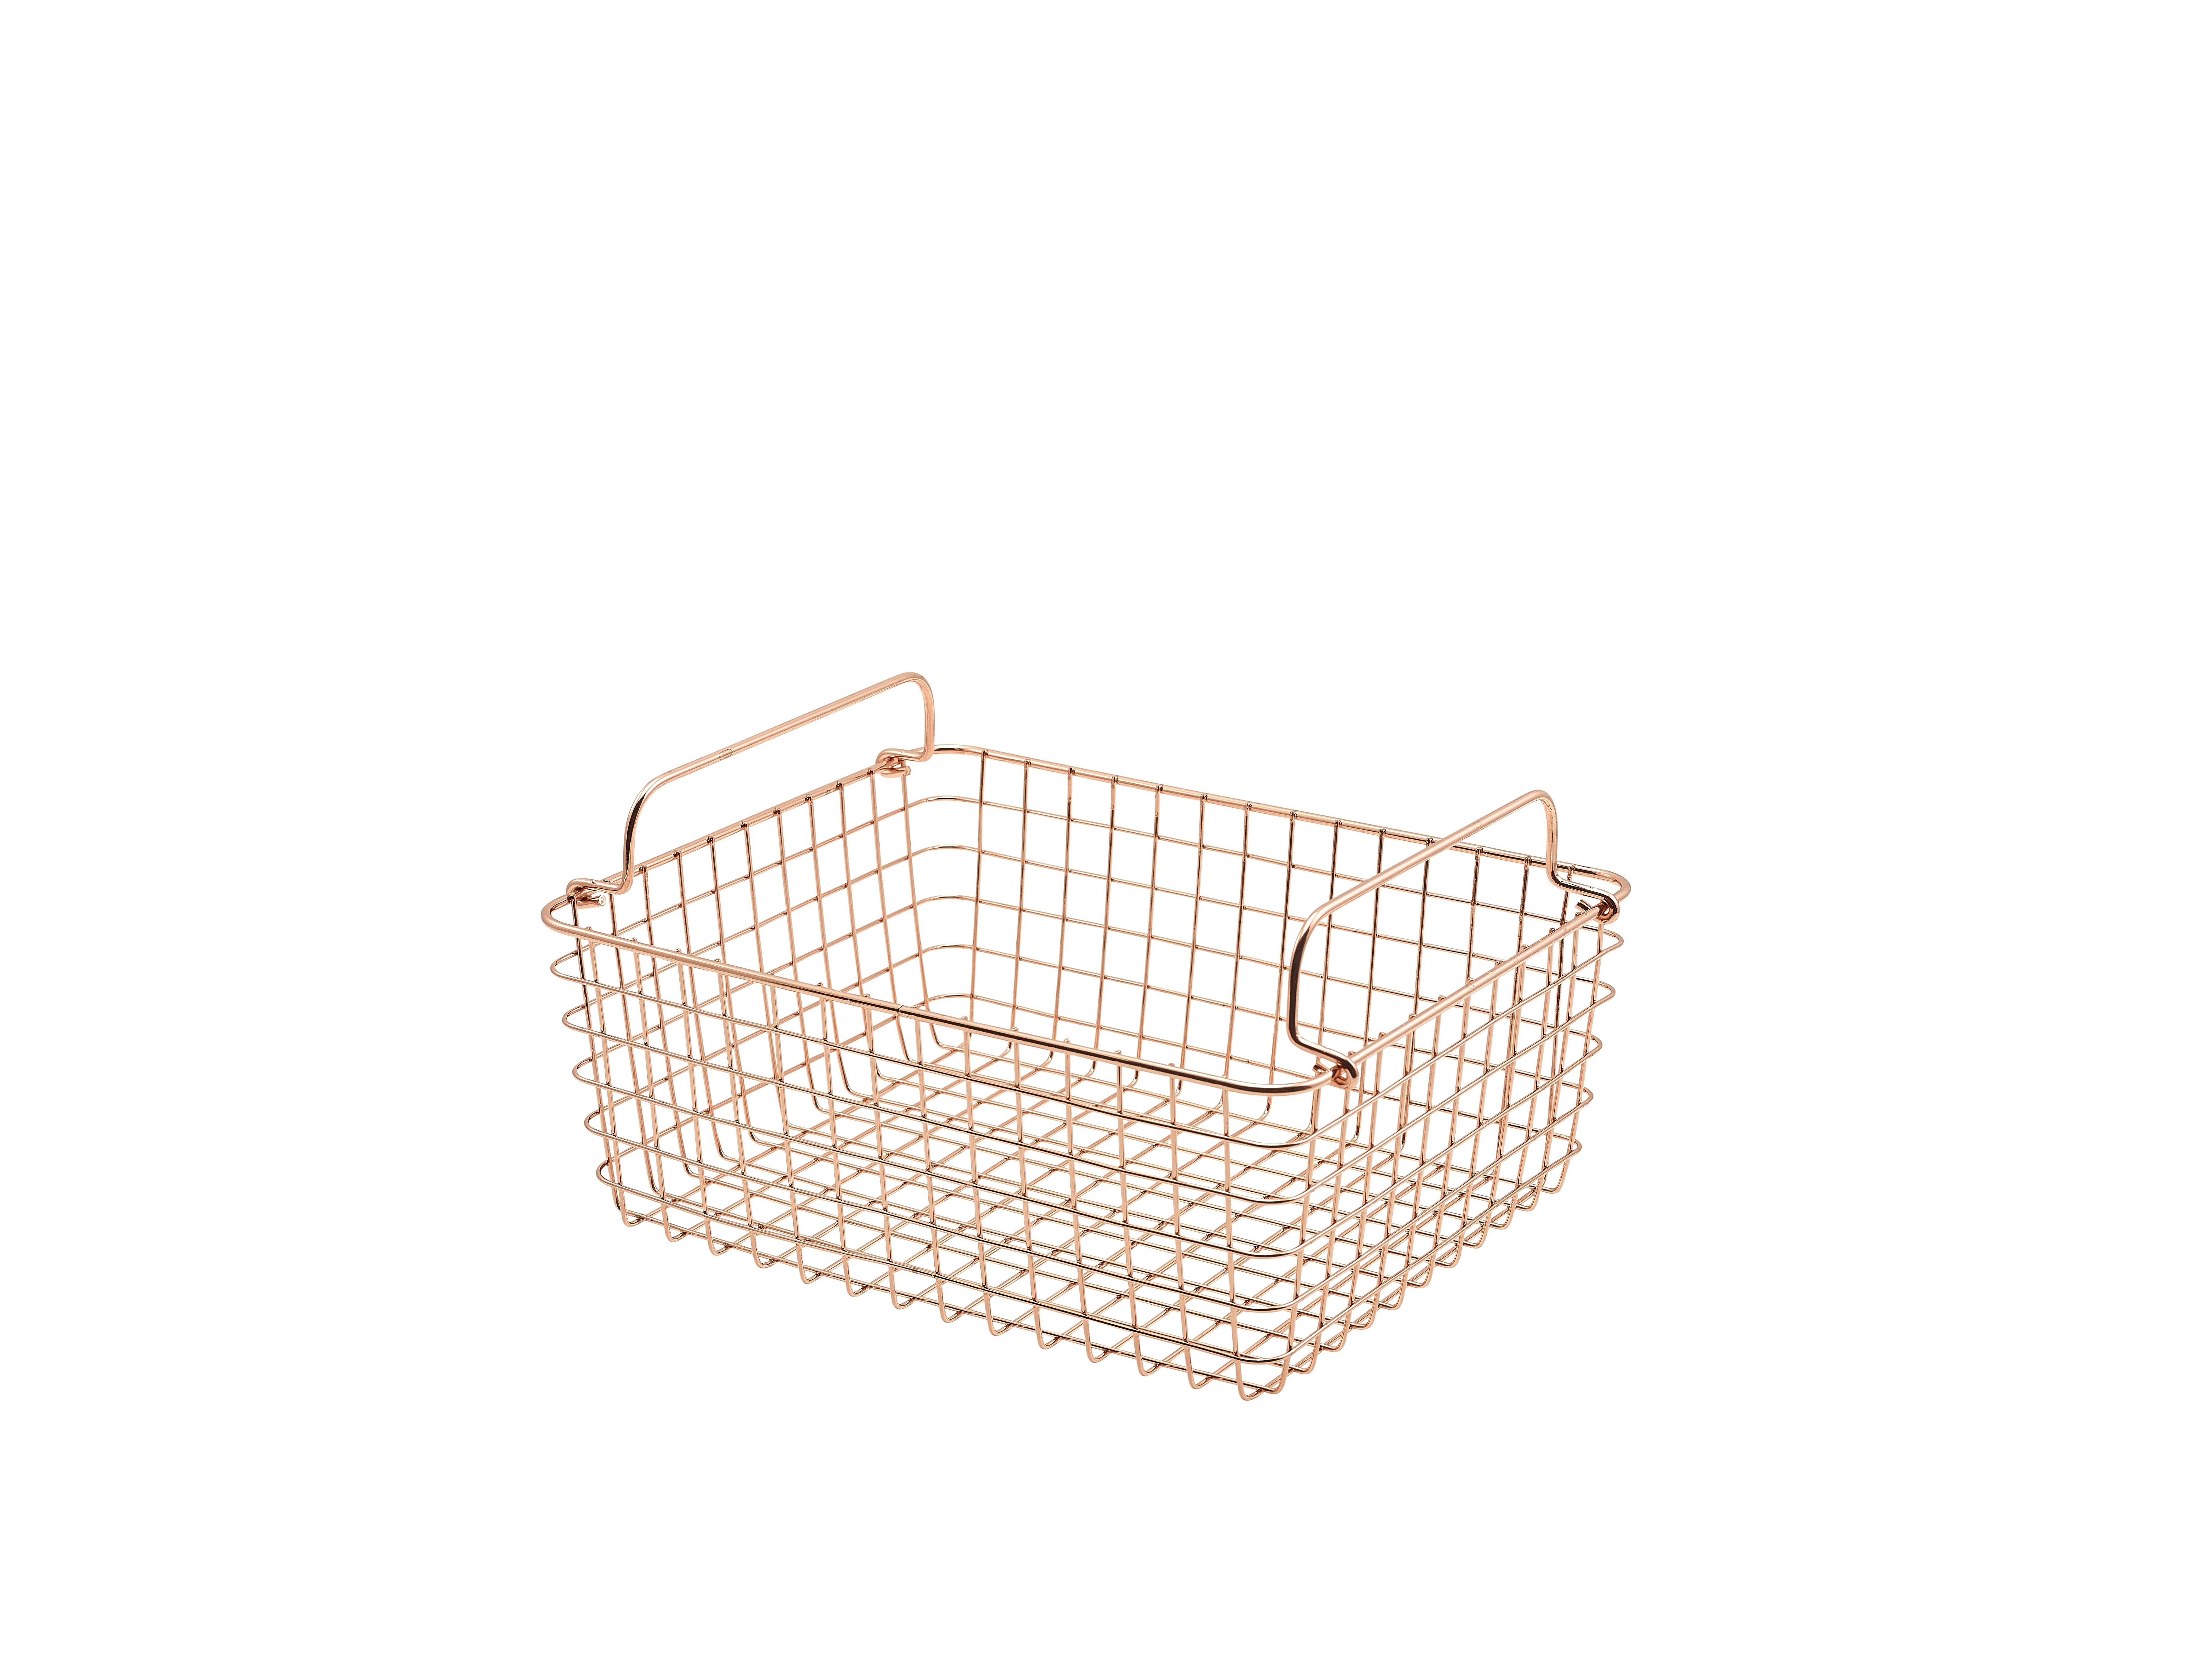 Copper Wire Display Basket GN1/2